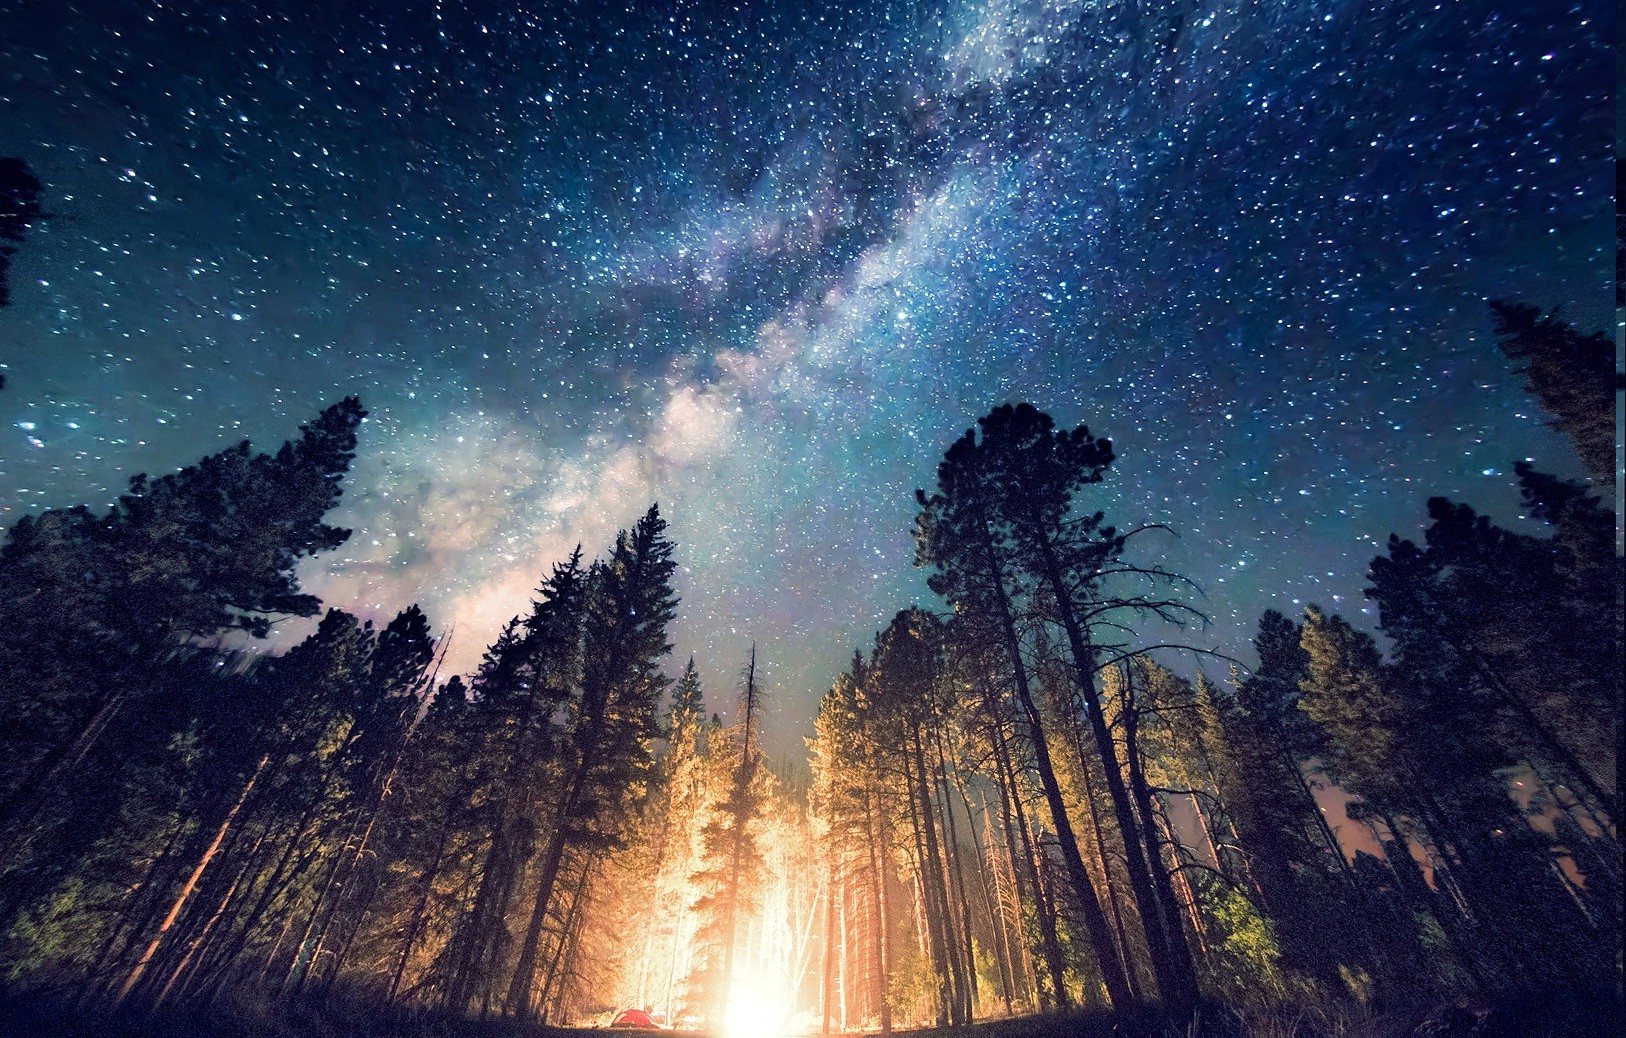 forest, Camping, Starry Night, Trees, Milky Way, Long Exposure, Lights, Uni...